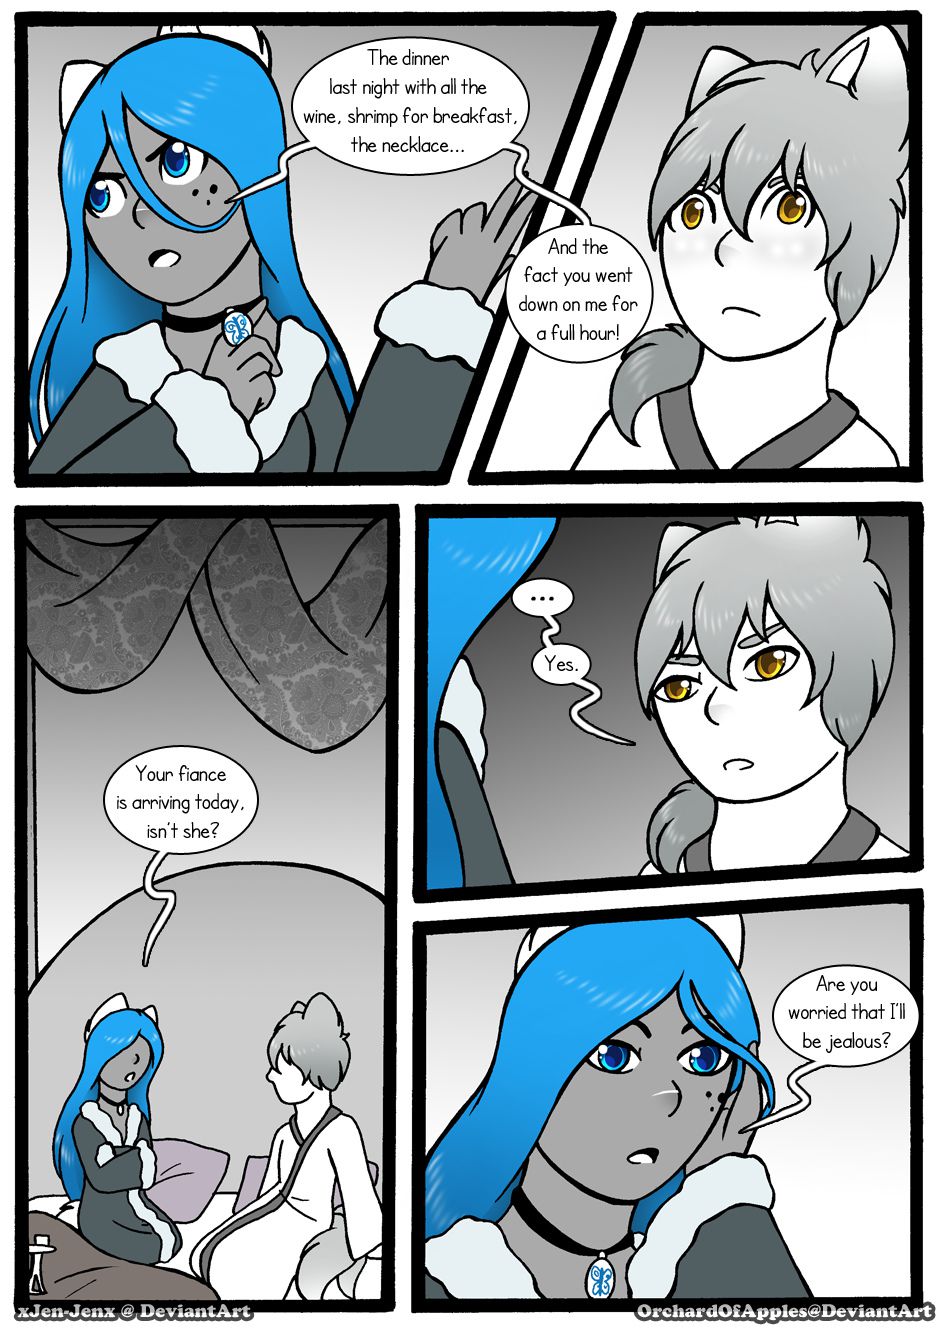 [Jeny-jen94] Between Kings and Queens [Ongoing] 191